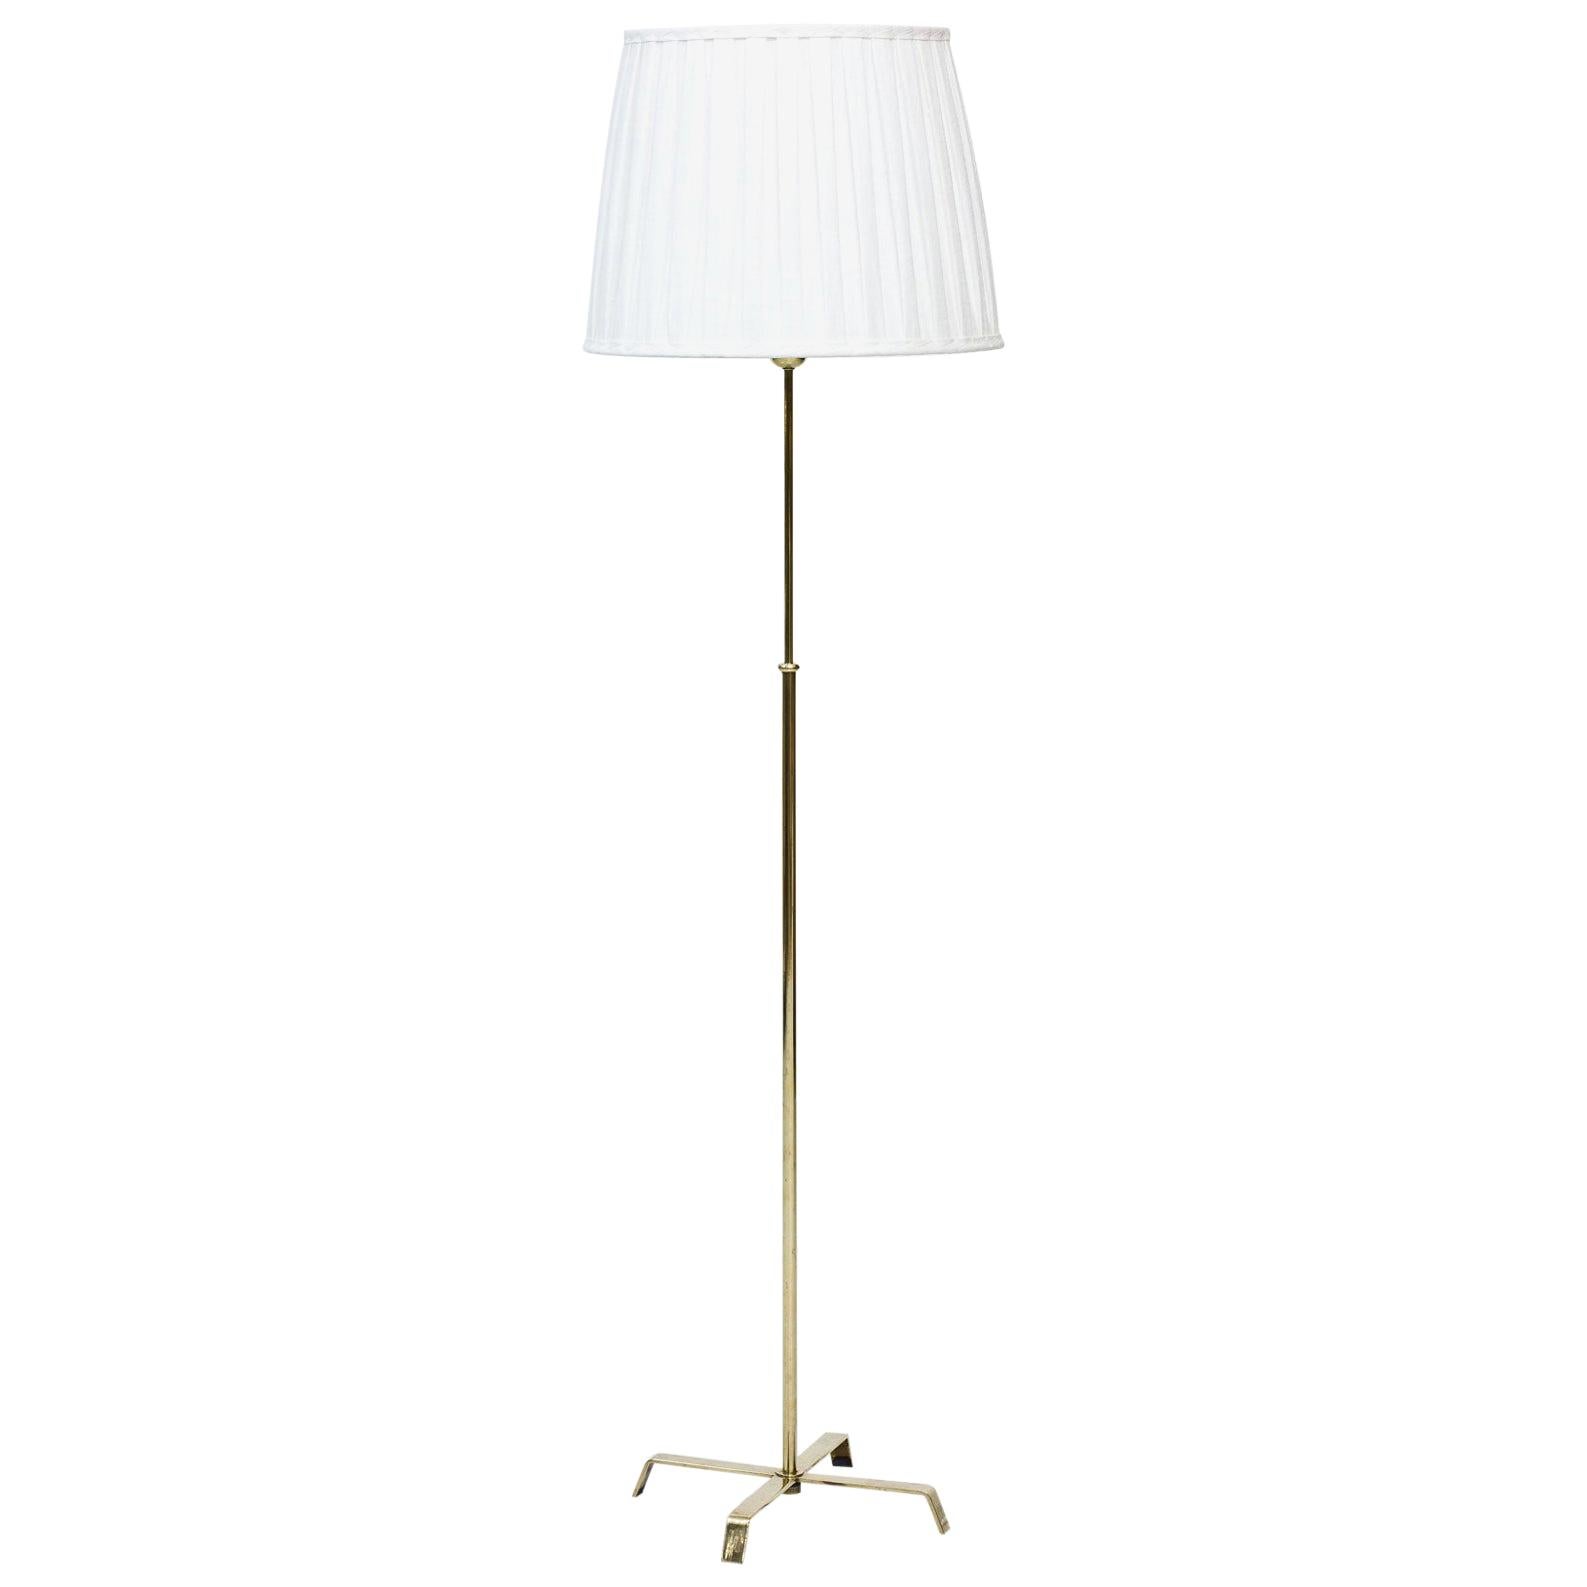 Floor lamp manufactured in Sweden by Böhlmarks lamp fabric during the 1940s. 
Made from brass with hand pleated lamp shade in linen fabric. 
Adjustable height of the stem. Engraved on the base.